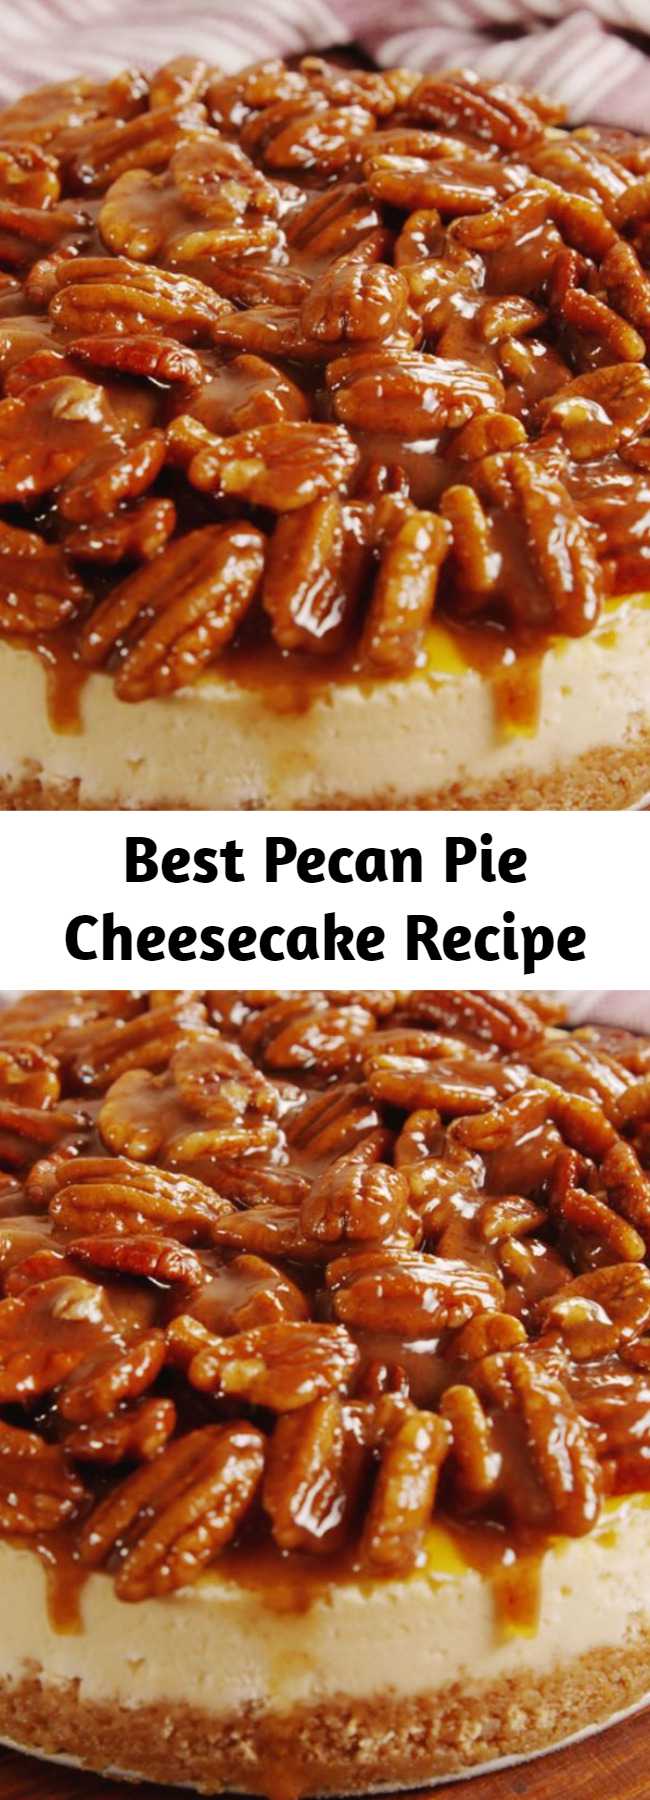 Best Pecan Pie Cheesecake Recipe - Take your pecan pie to the next level and combine it with your favorite cheesecake. You'll have a creamy base with a sweet crunchy topping that makes this the best Thanksgiving dessert ever. You can make the topping up to an hour in advance and keep at room temperature. But don't refrigerate it or else the butter will solidify! #food #holiday #pastryporn #familydinner #comfortfood #easyrecipe #recipe #forkyeah #eatthetrend #plating